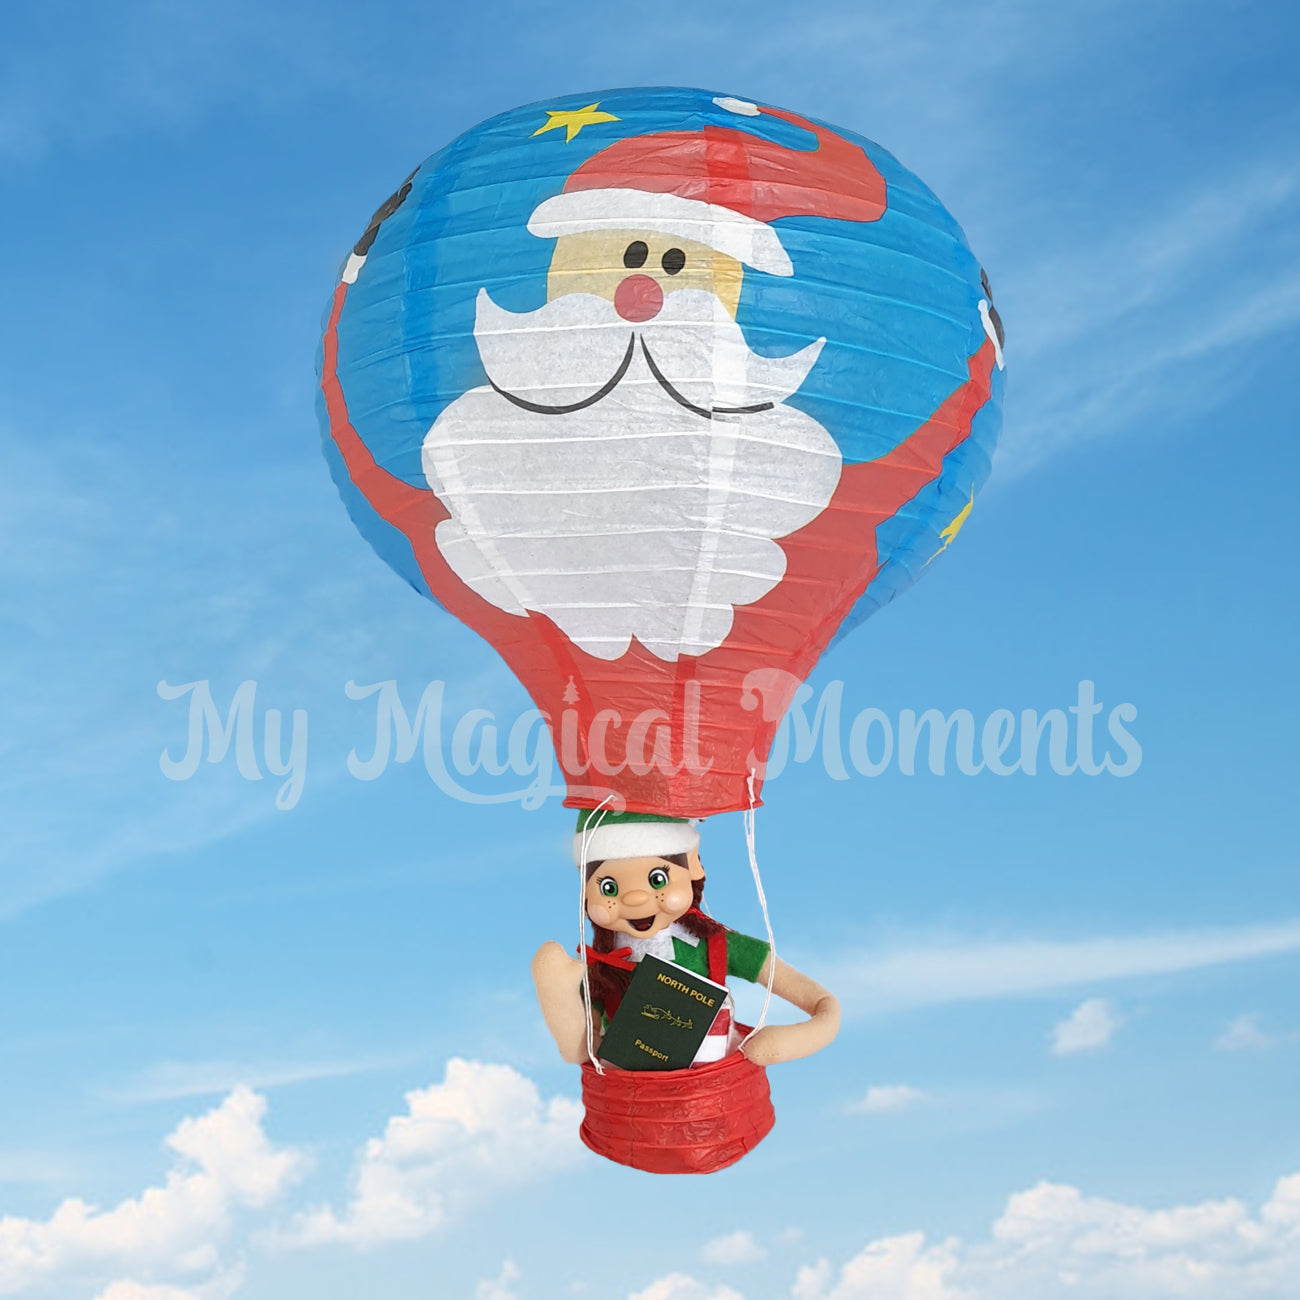 Elf flying in a hot air balloon